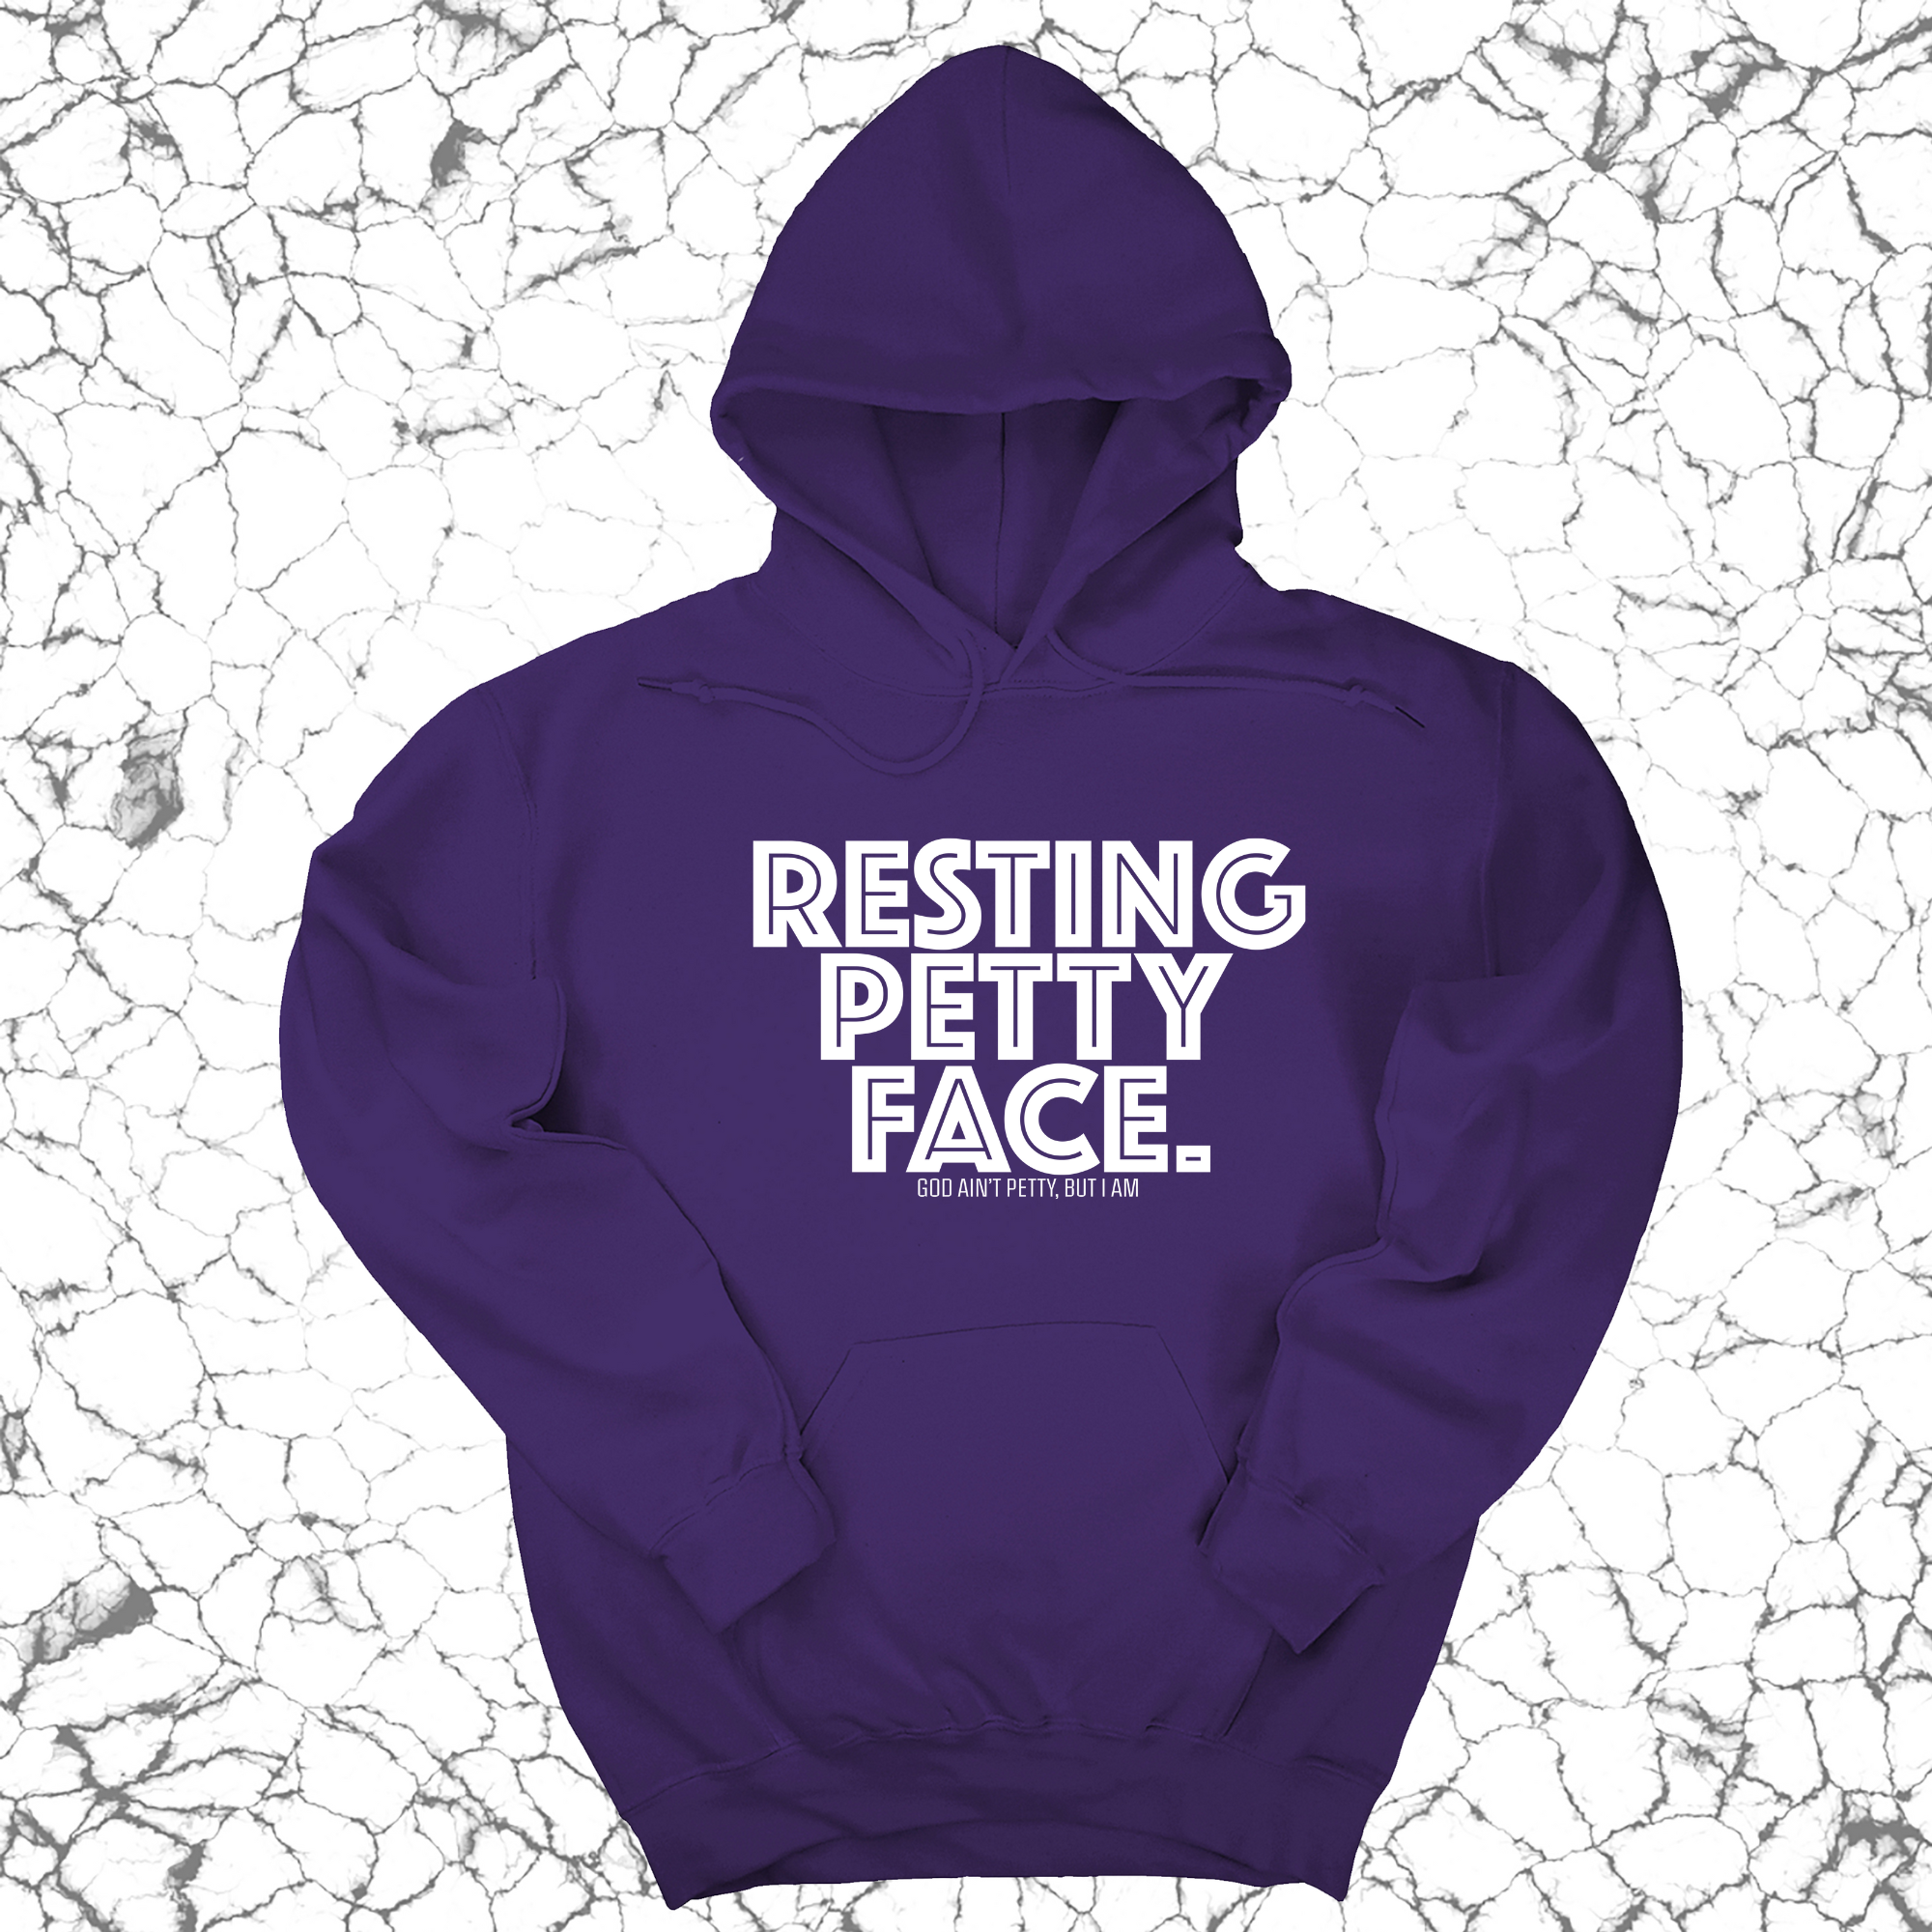 Resting Petty Face Unisex Hoodie-Hoodie-The Original God Ain't Petty But I Am